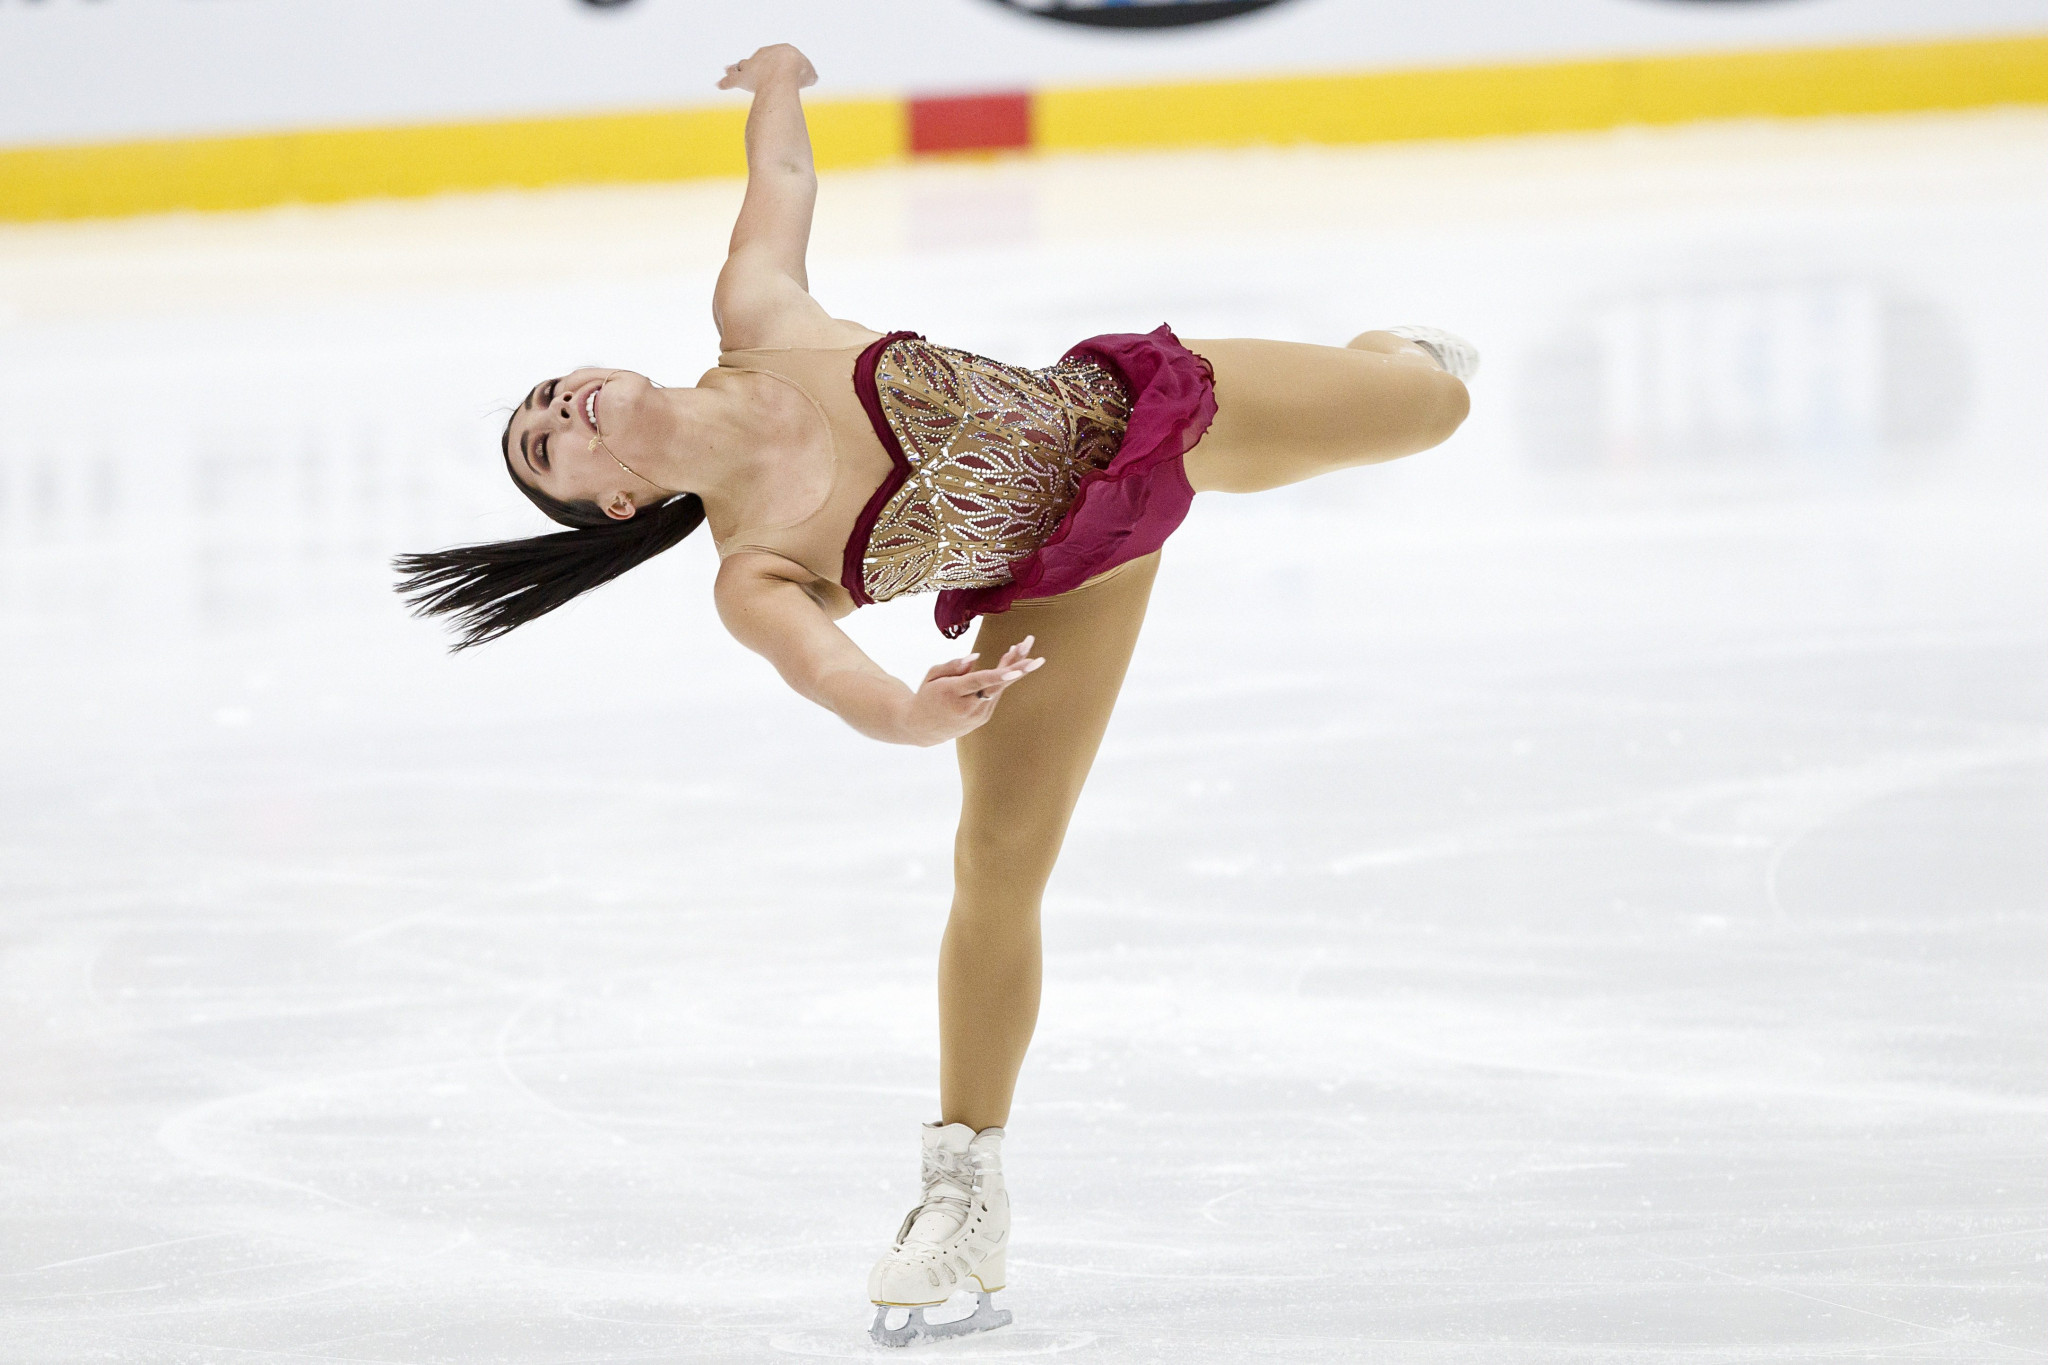 Canada's World Championships bronze medallist Gabrielle Daleman has not competed on the circuit so far this season but has entered the Audi Cup of China in Beijing ©Getty Images